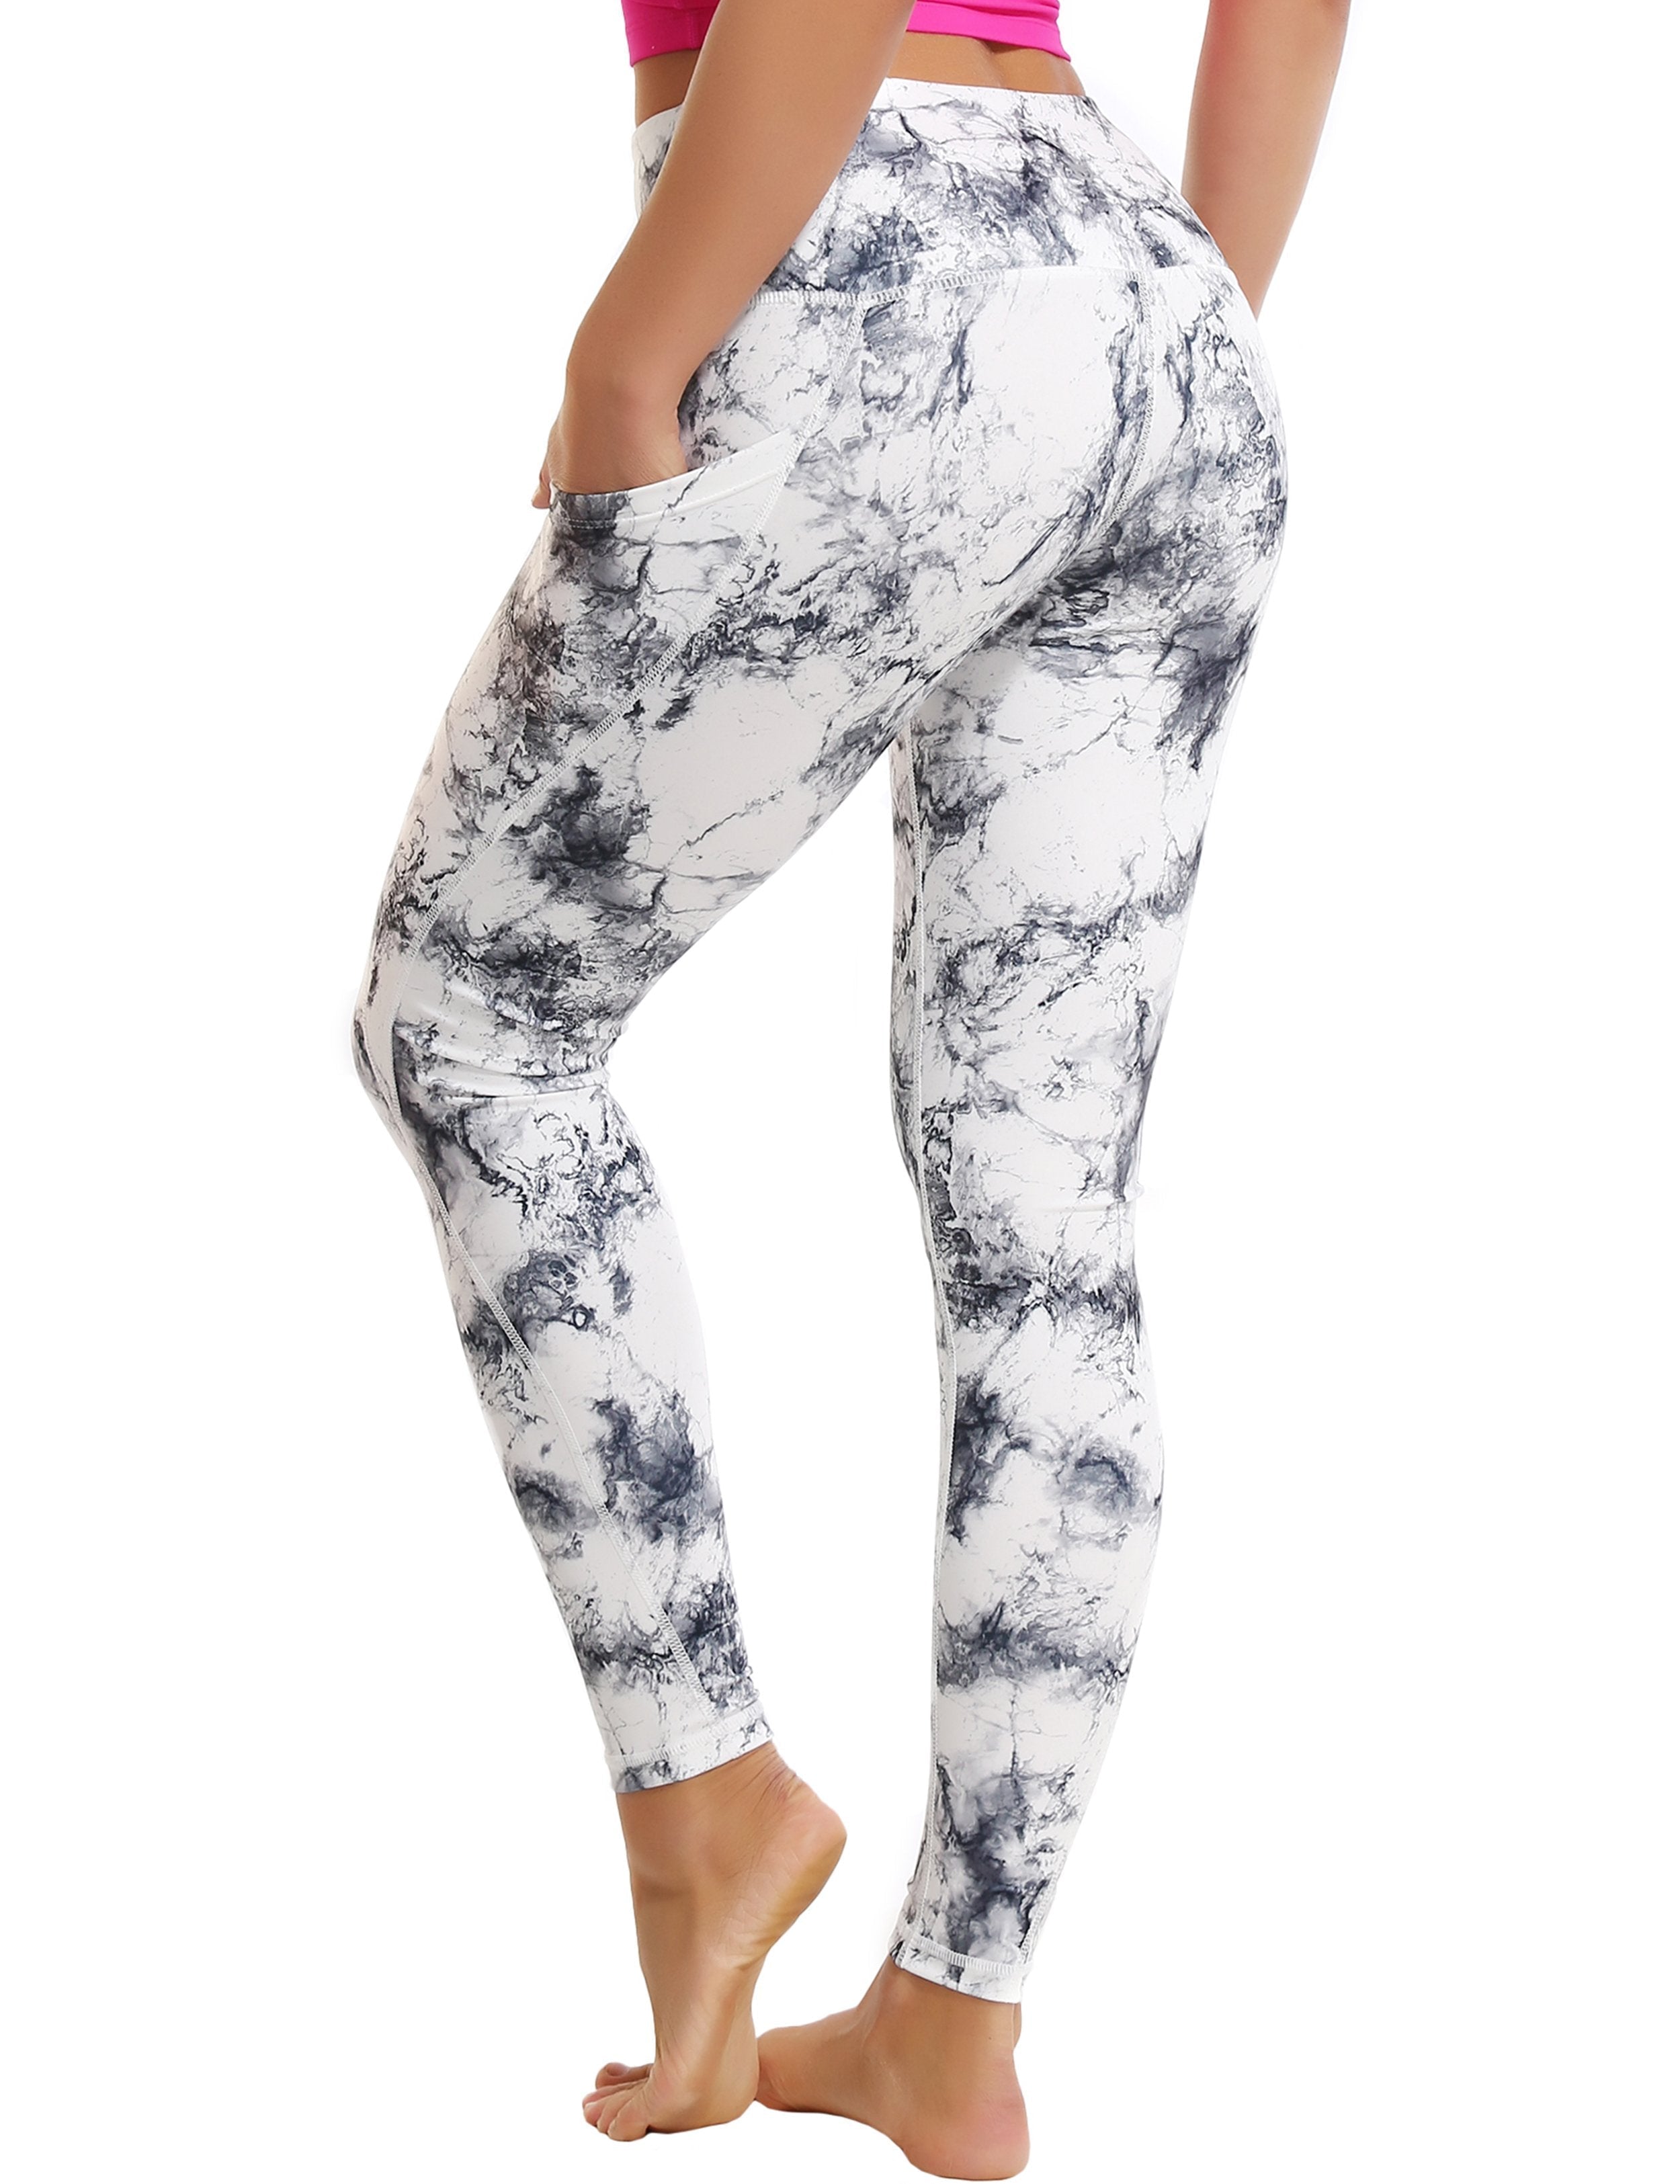 High Waist Side Pockets Plus Size Pants arabescato 78%Polyester/22%Spandex Fabric doesn't attract lint easily 4-way stretch No see-through Moisture-wicking Tummy control Inner pocket